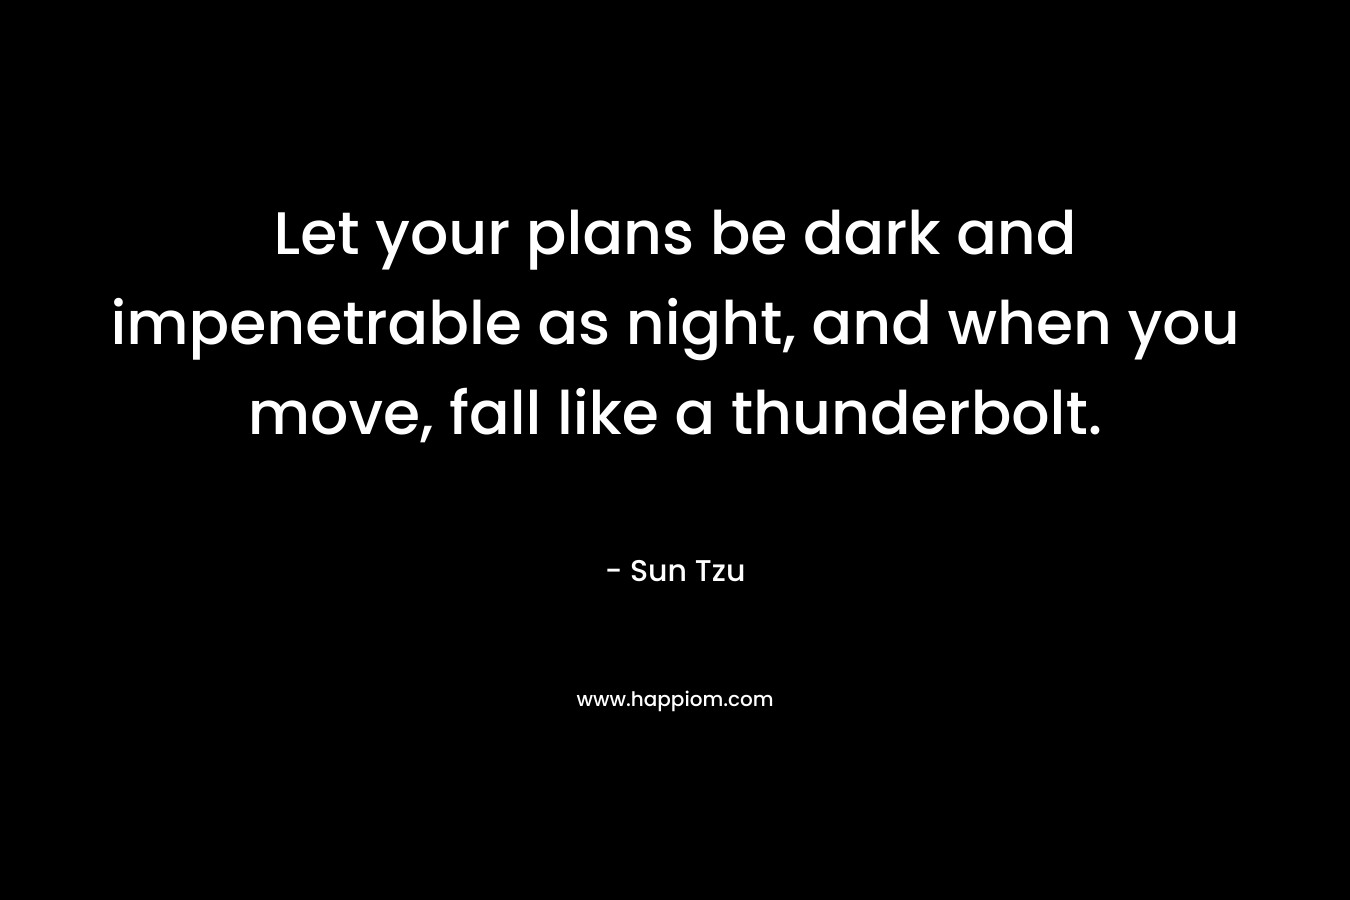 Let your plans be dark and impenetrable as night, and when you move, fall like a thunderbolt.